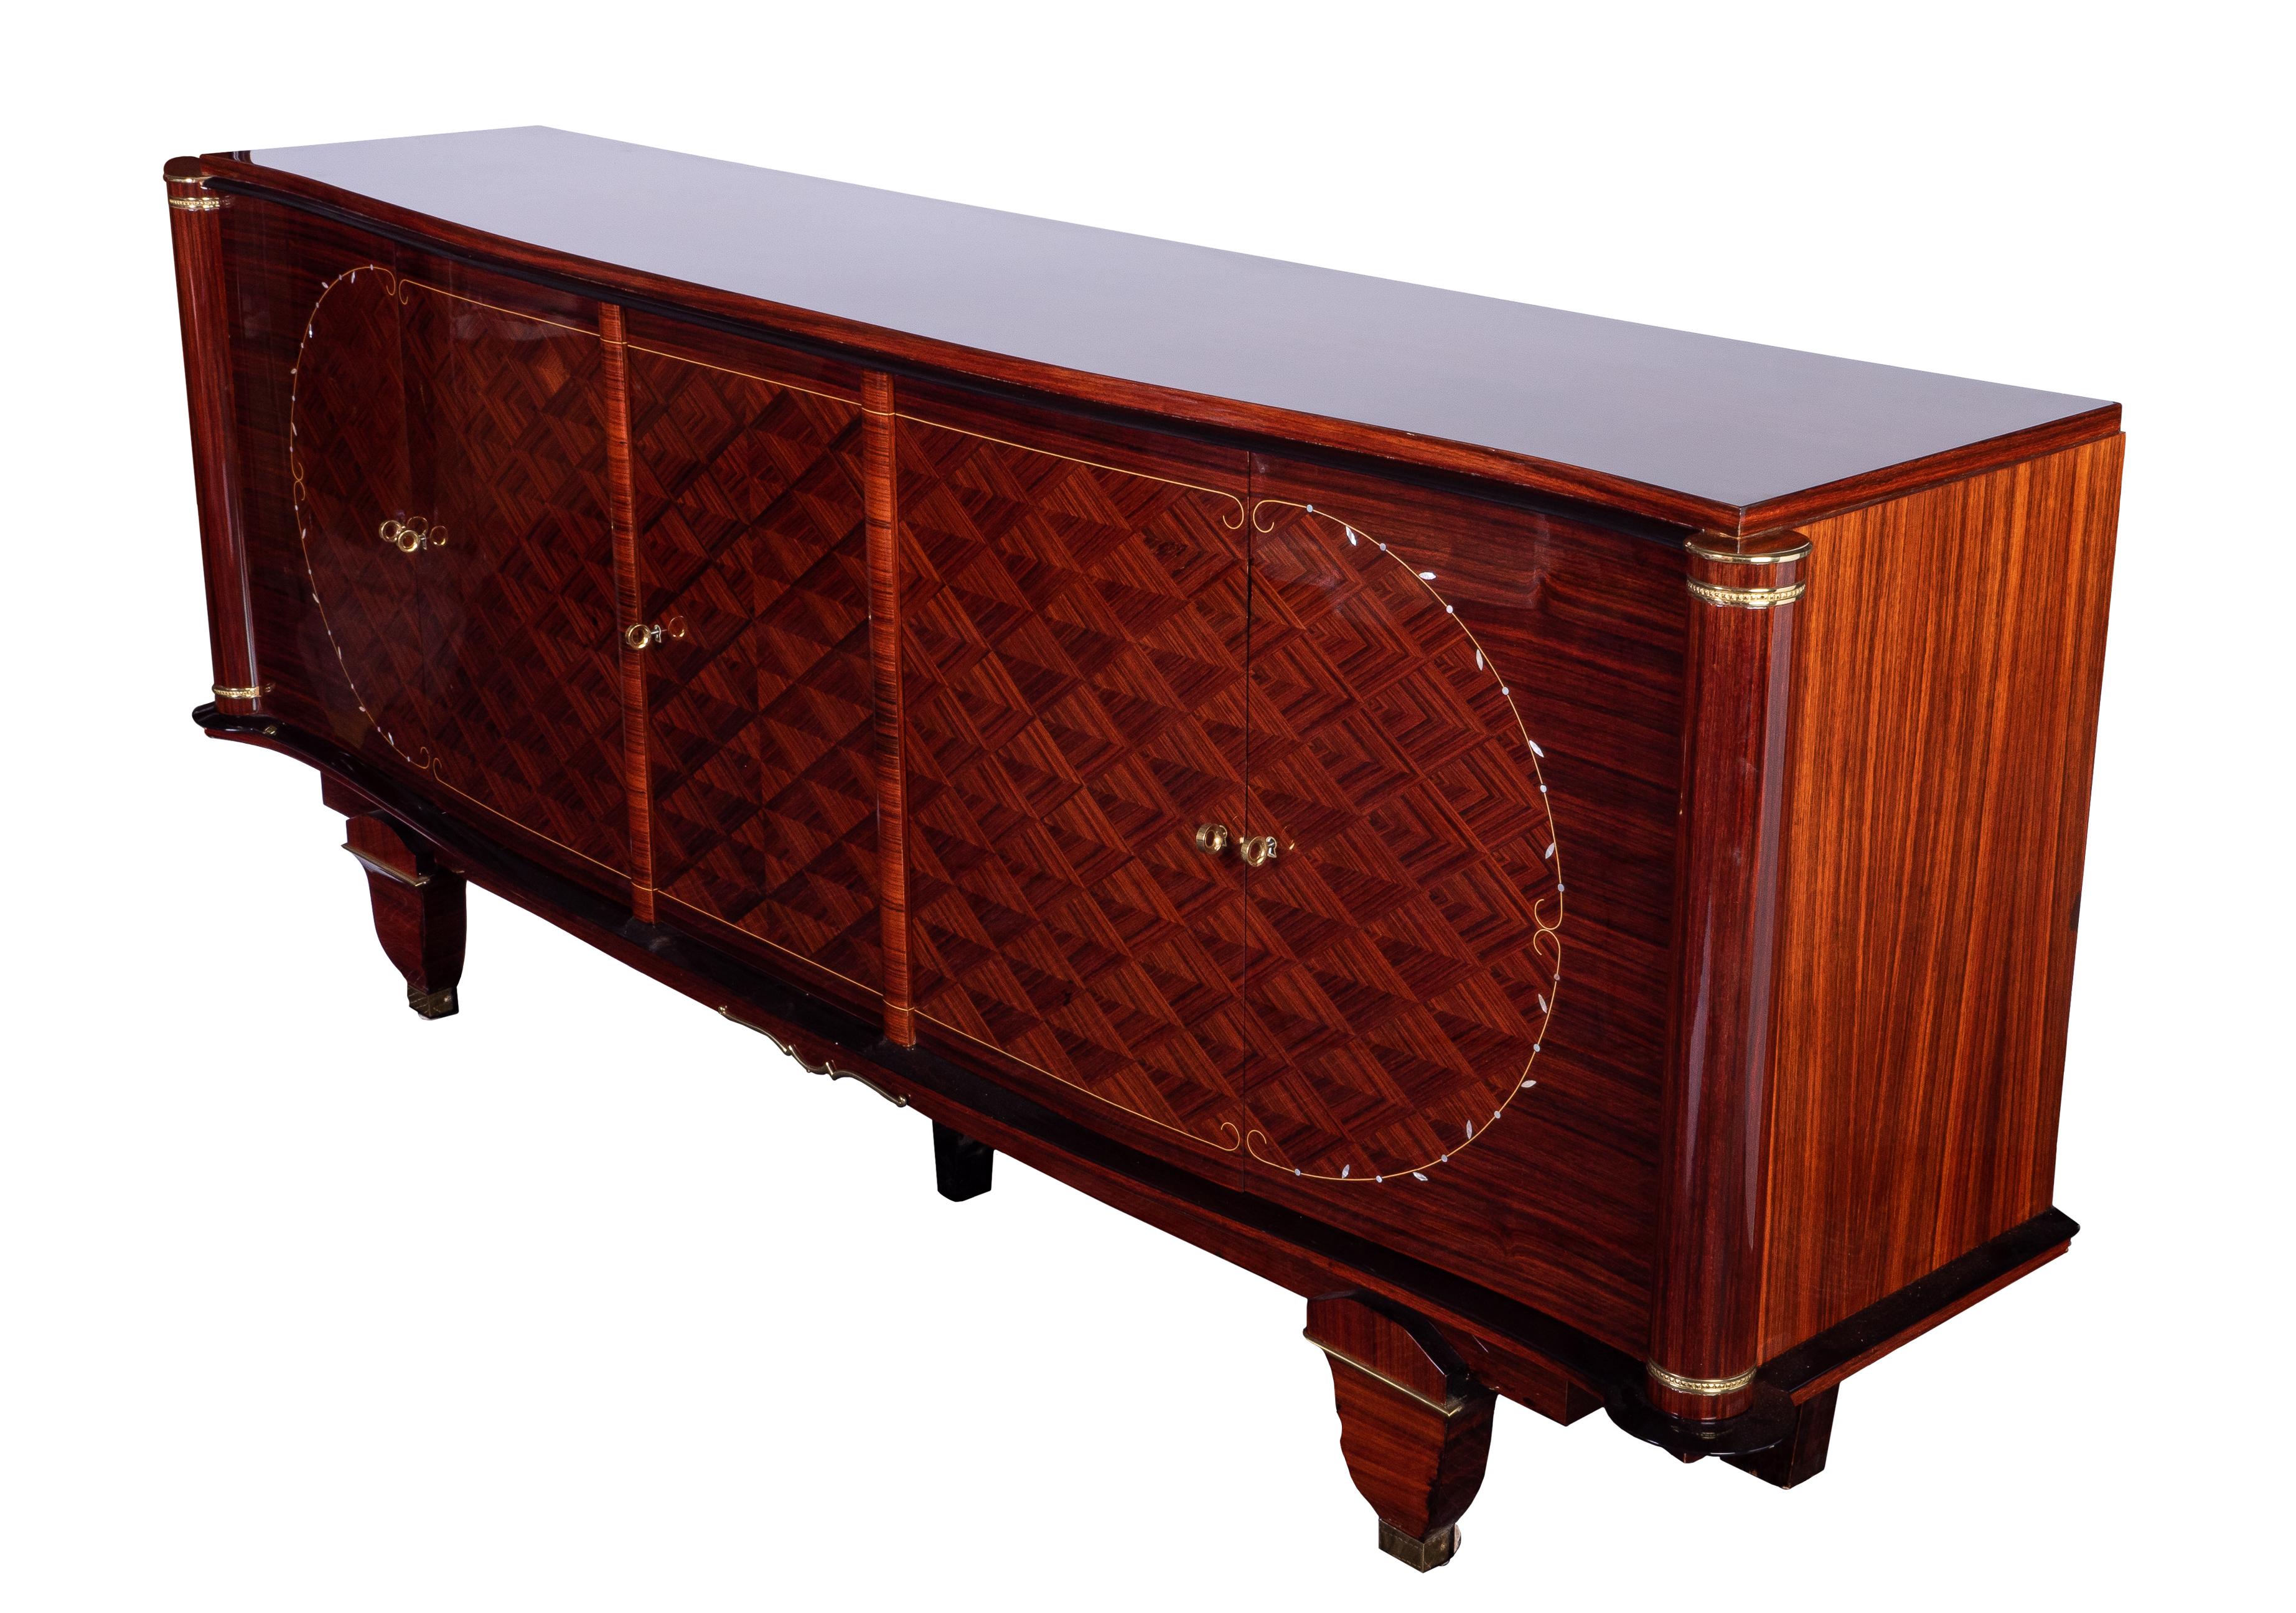 This exquisite Art Deco sideboard or credenza was designed and executed by Jules Leleu in a solid mahogany frame veneered in Indian rosewood and finished in a high gloss lacquer. It features a complicated marquetry work on the doors with a unique